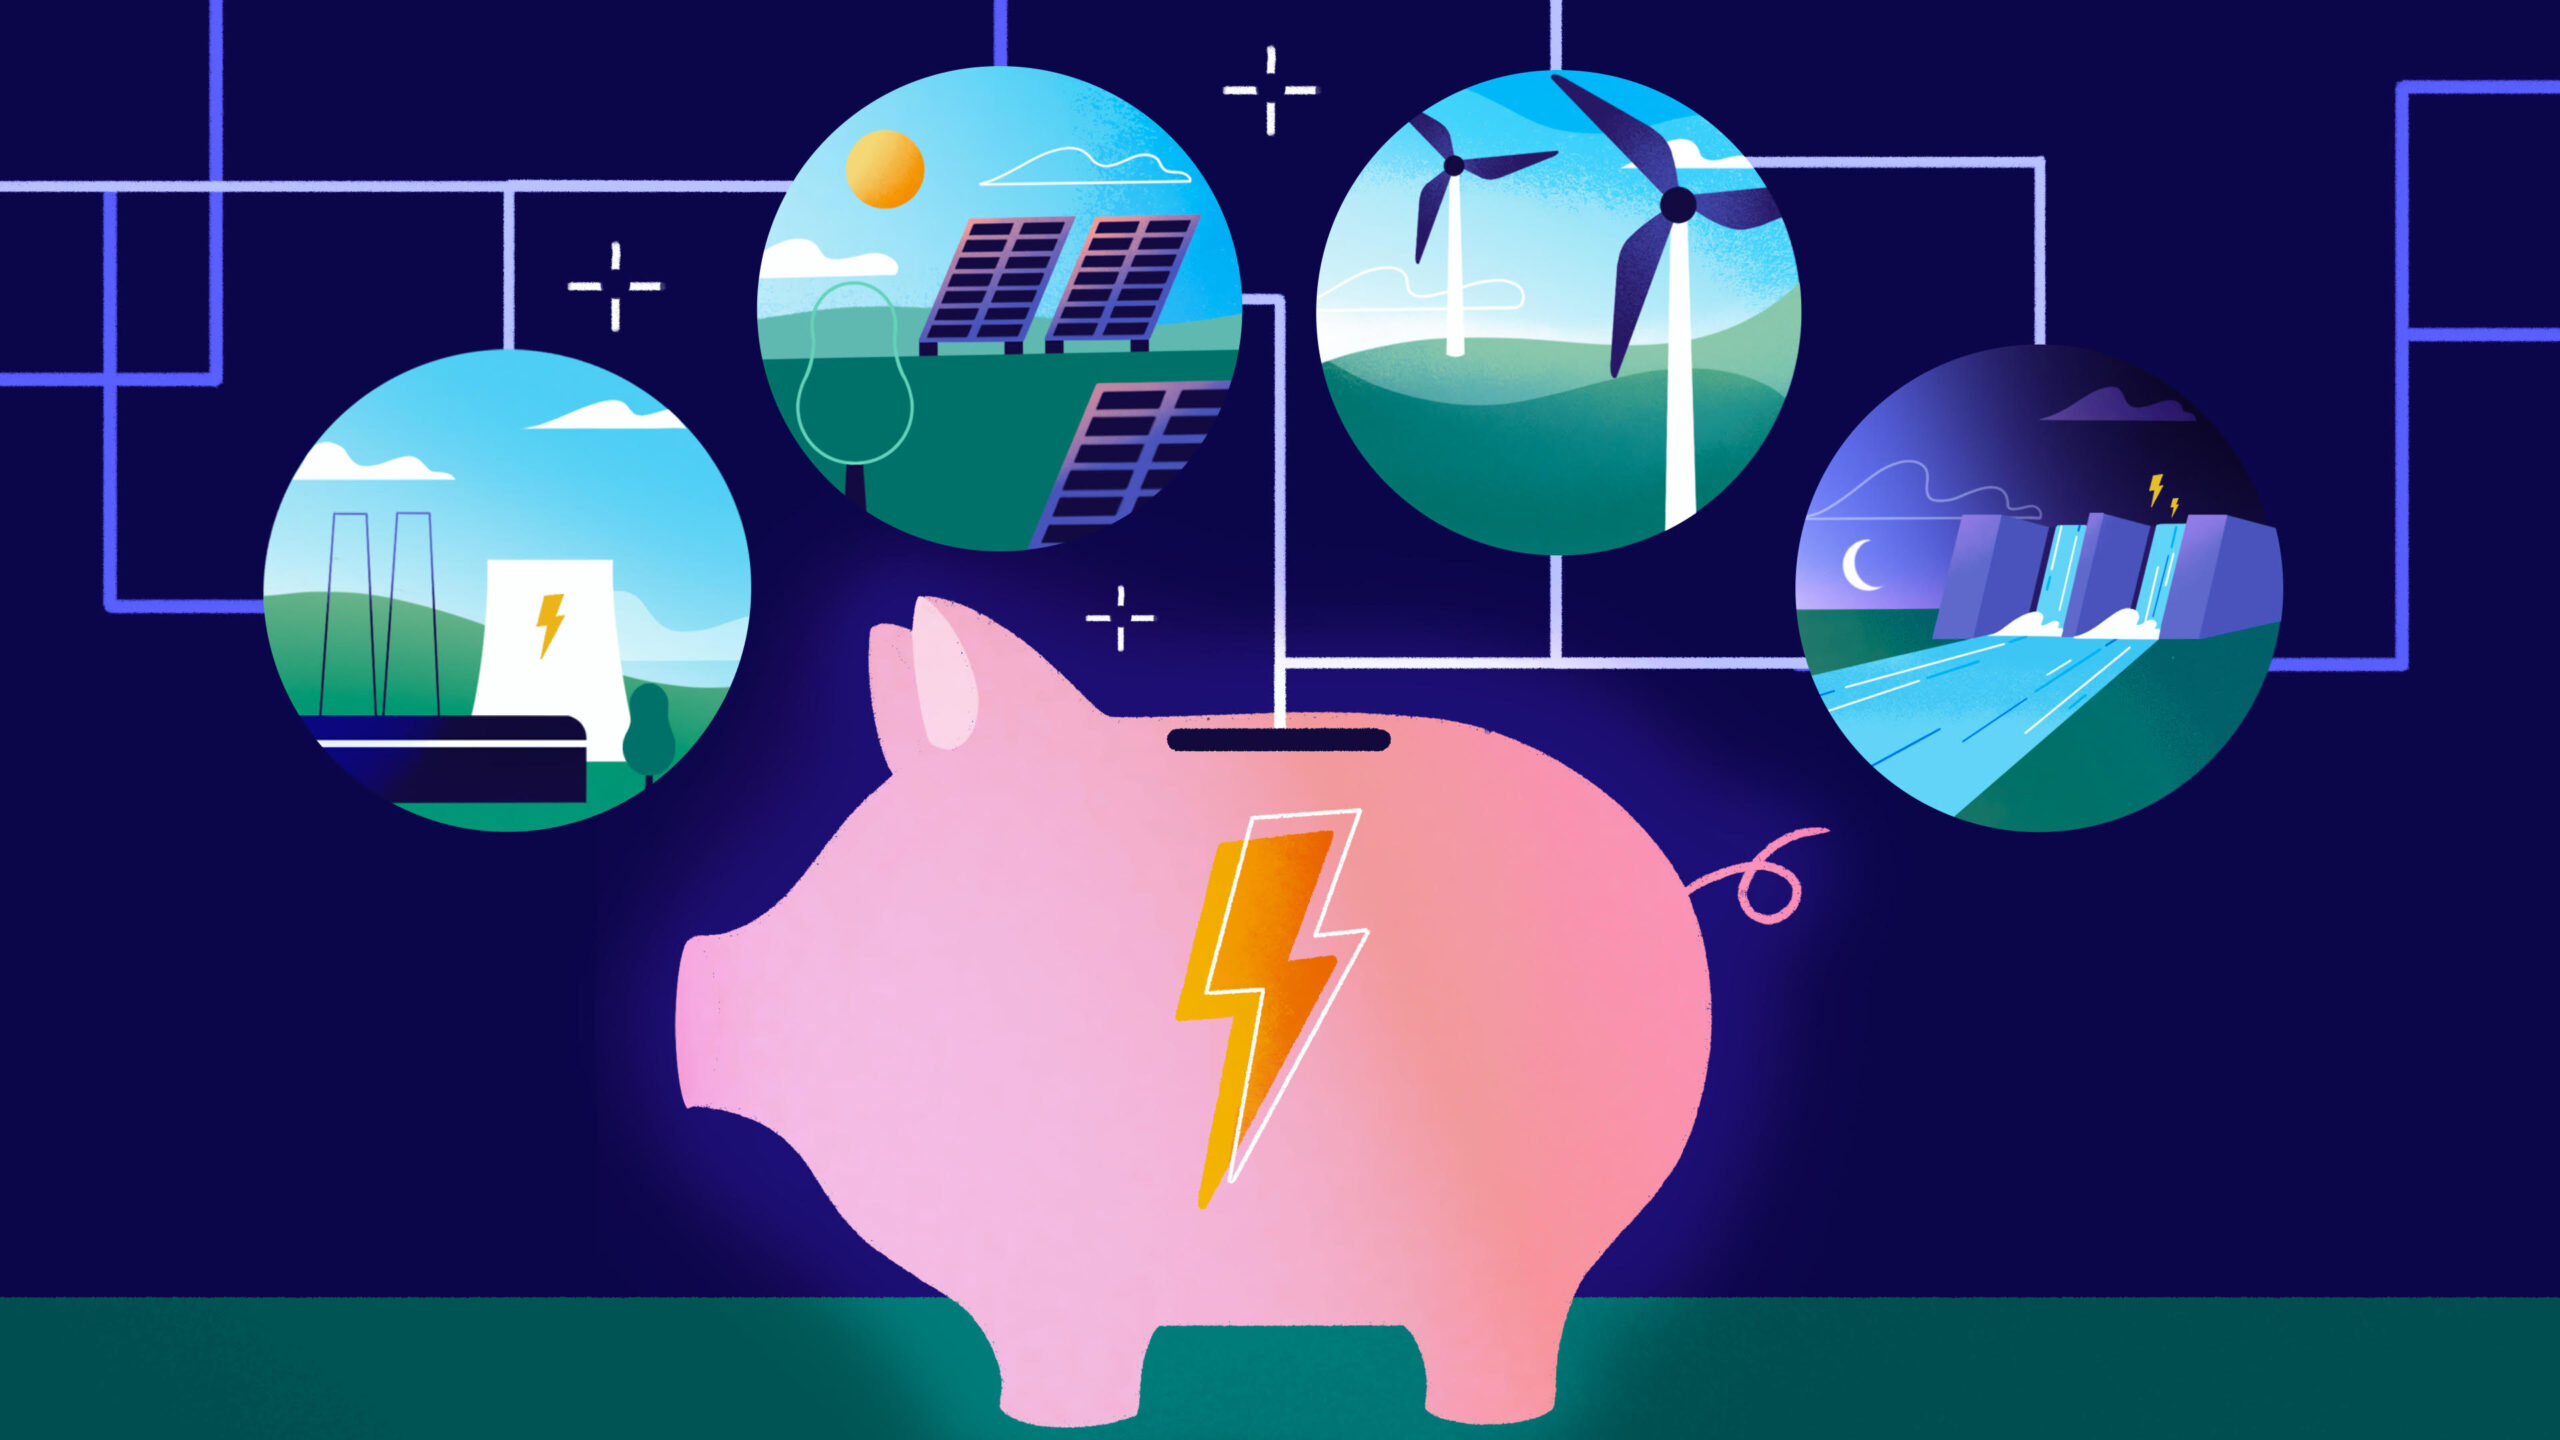 Illustration depicting floating "coins" of energy storage techniques going into a piggy bank